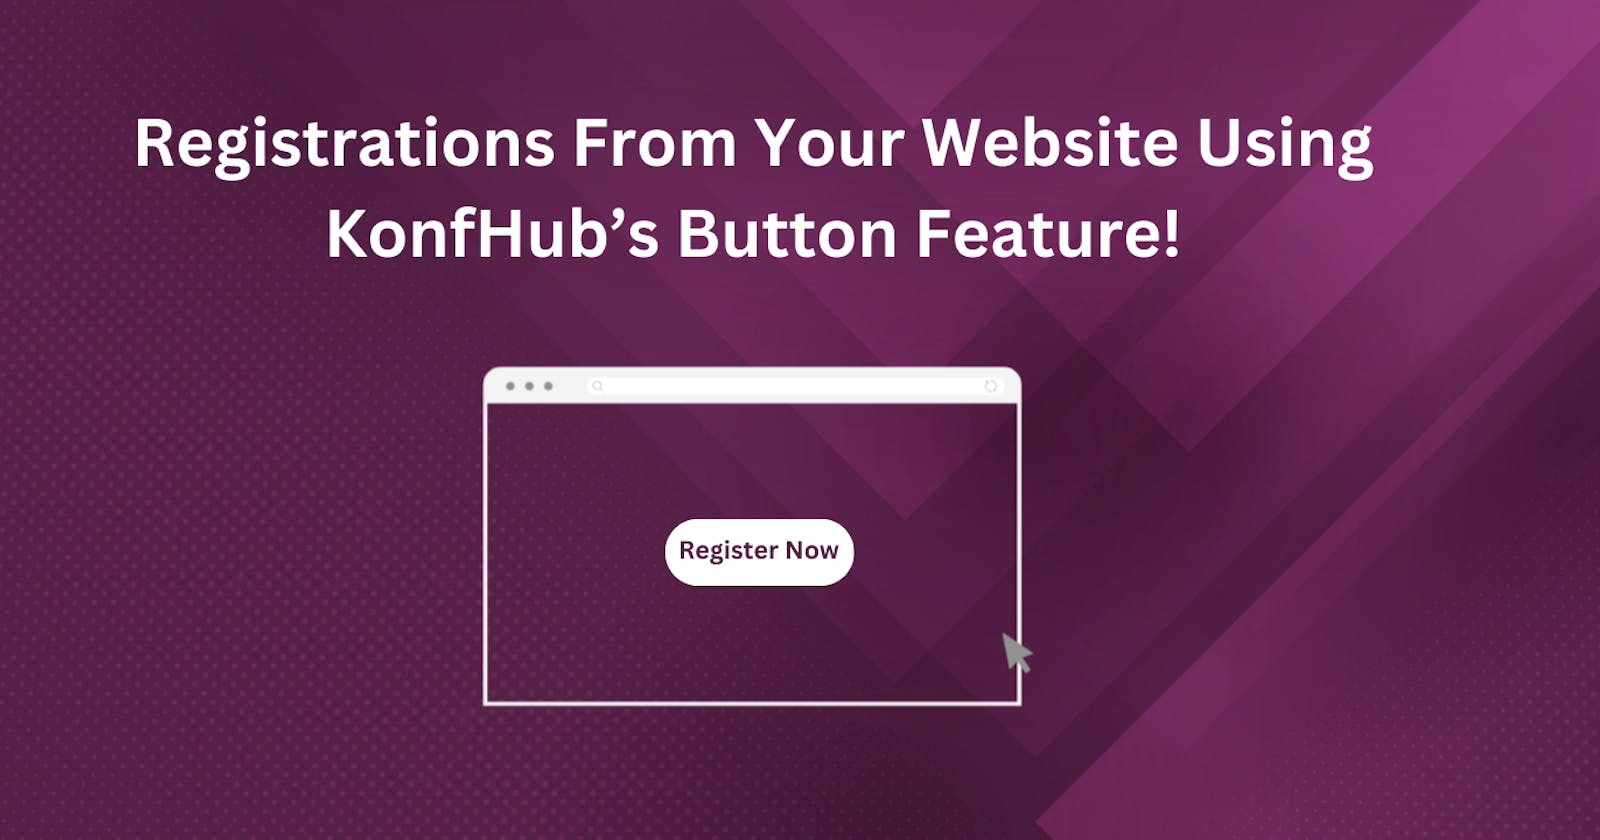 Registrations From Your Website Using KonfHub’s Button Feature!